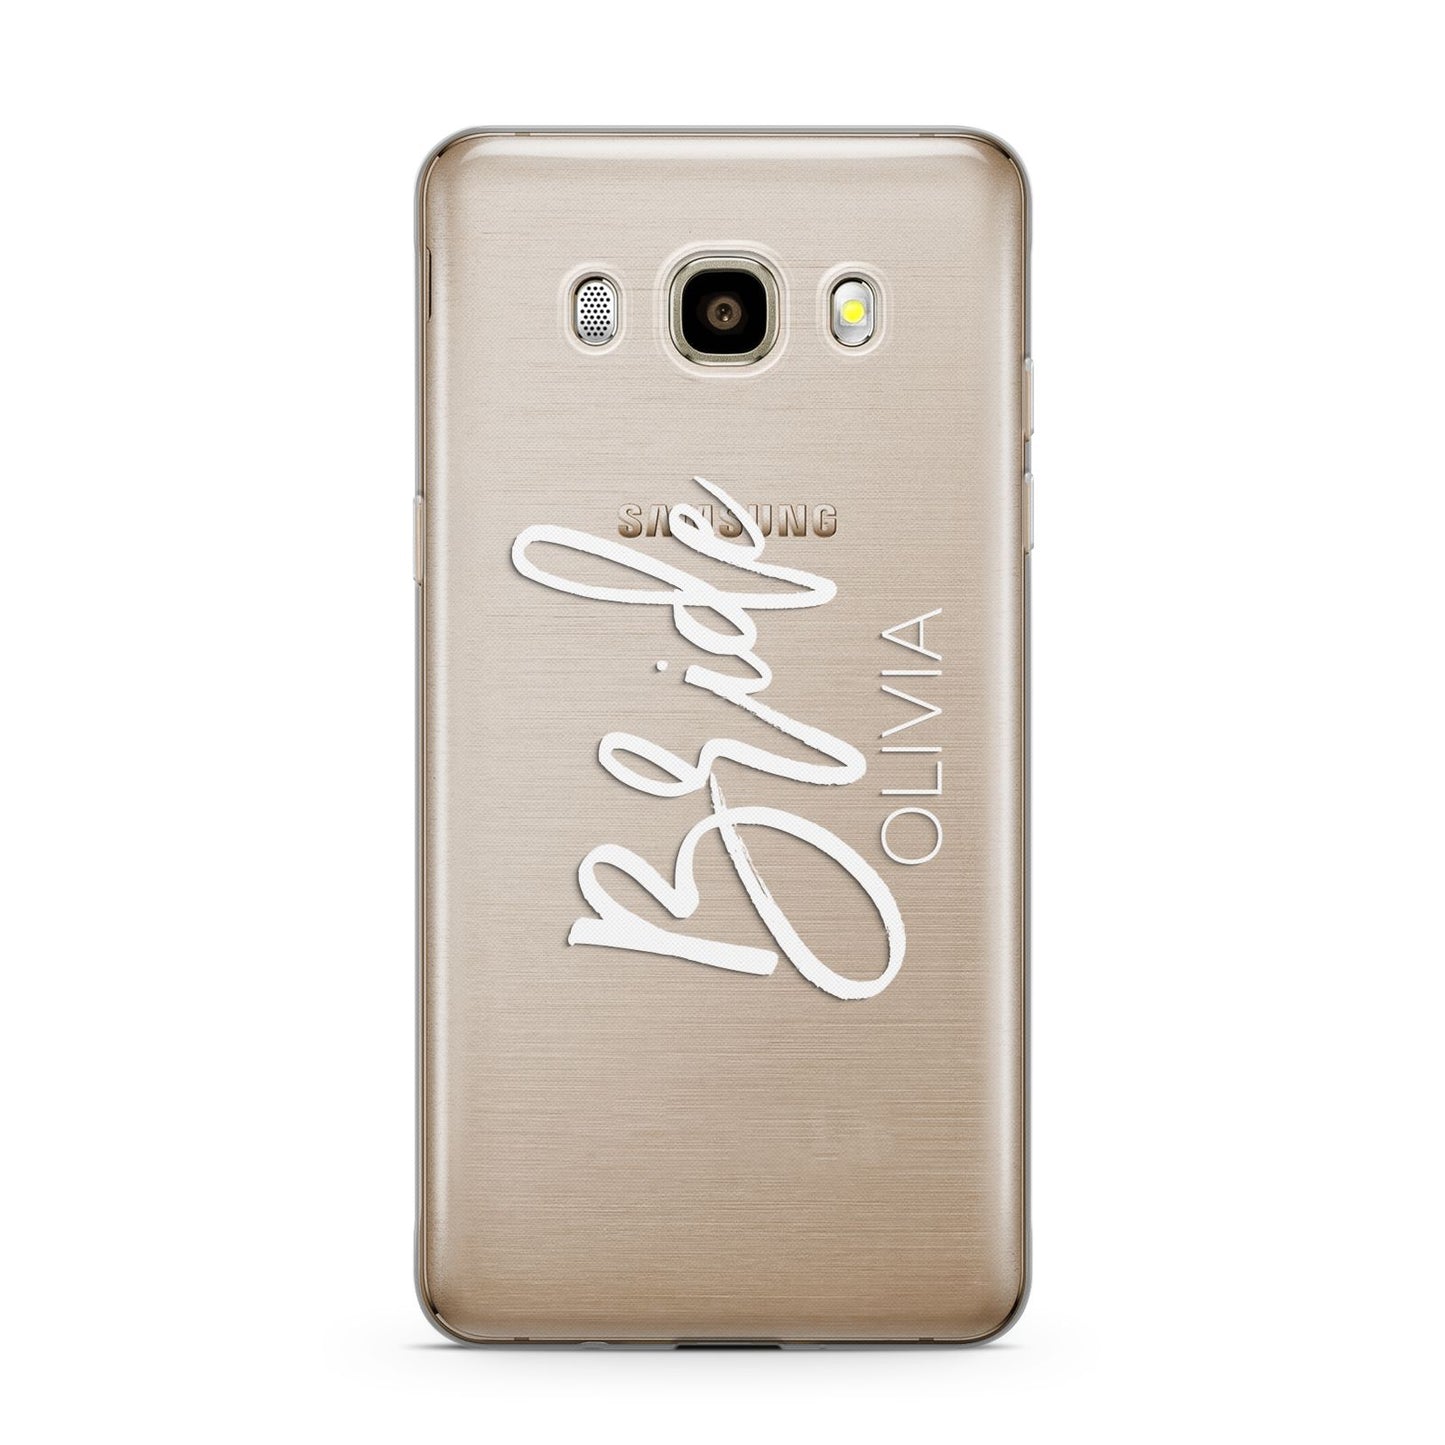 Personalised Bride Samsung Galaxy J7 2016 Case on gold phone